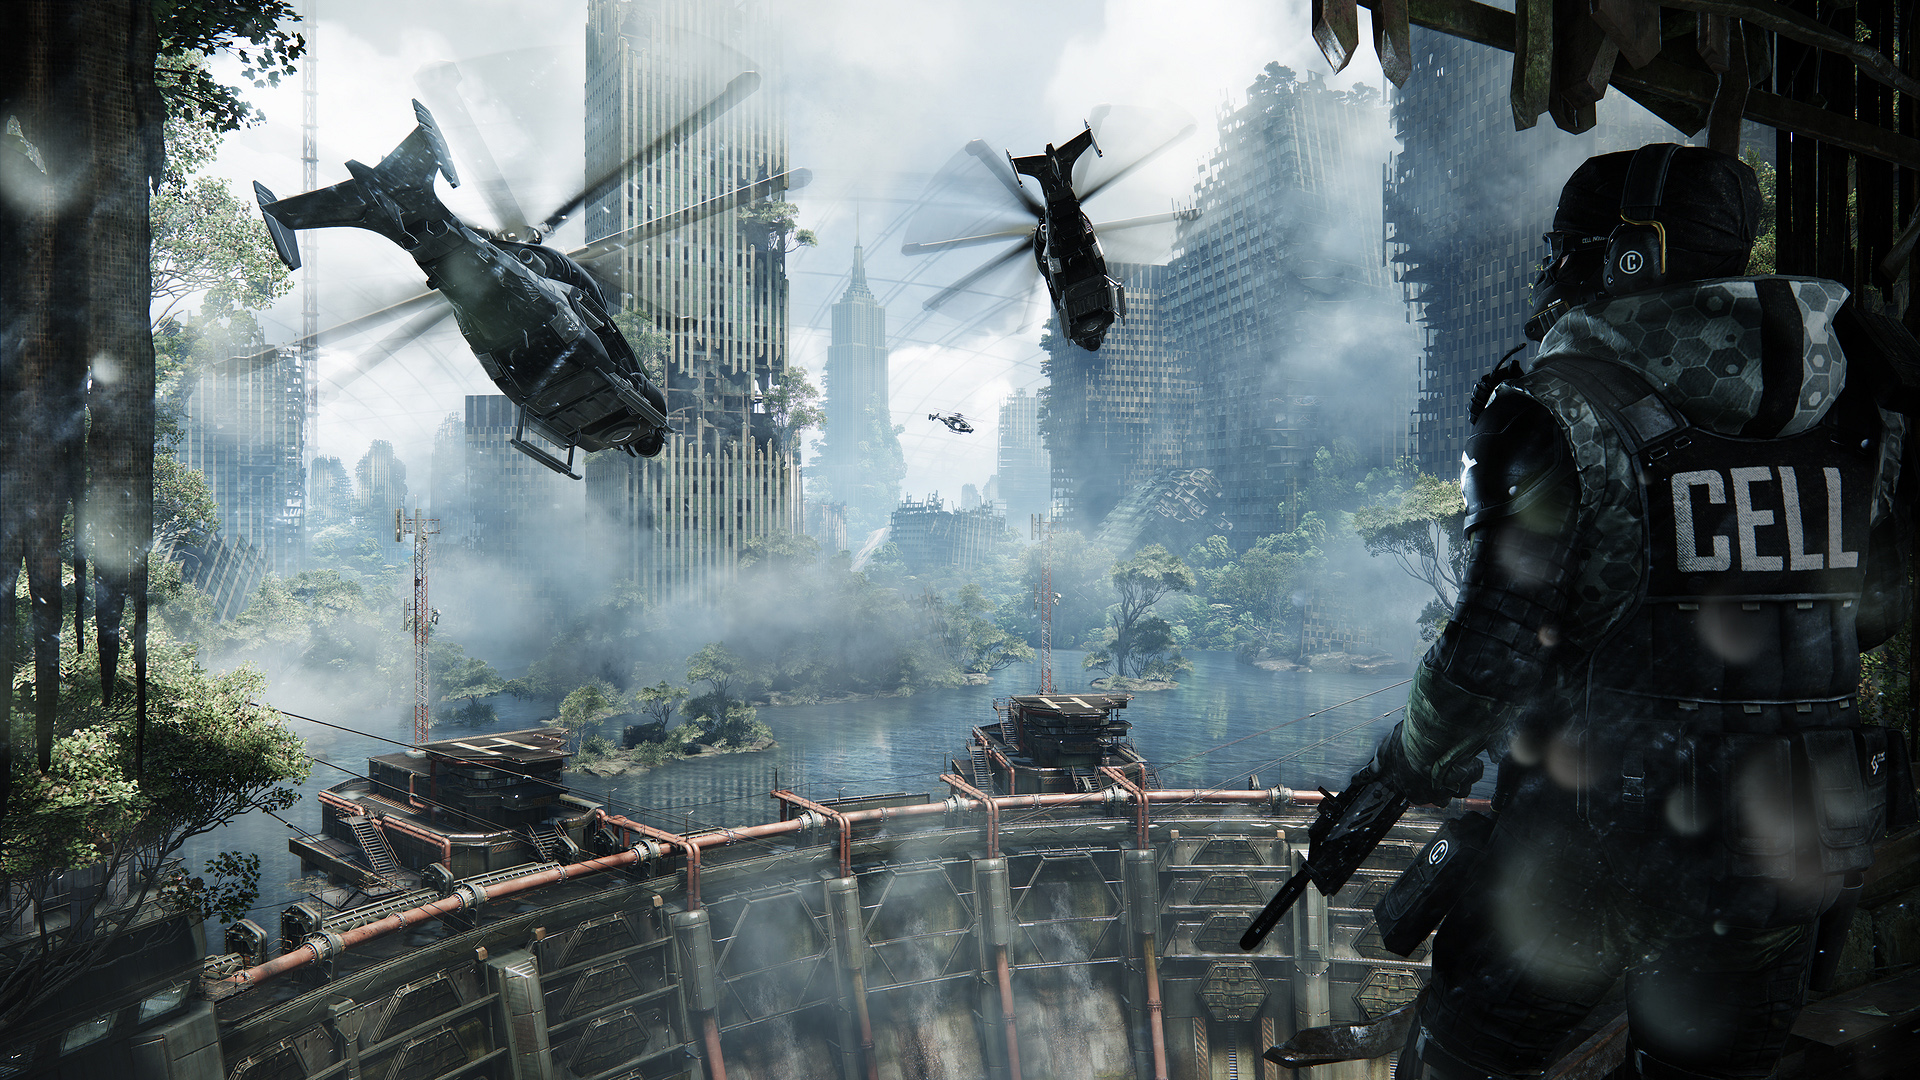 Crysis 3 HD Wallpaper Background Image 1920x1080 ID 372032